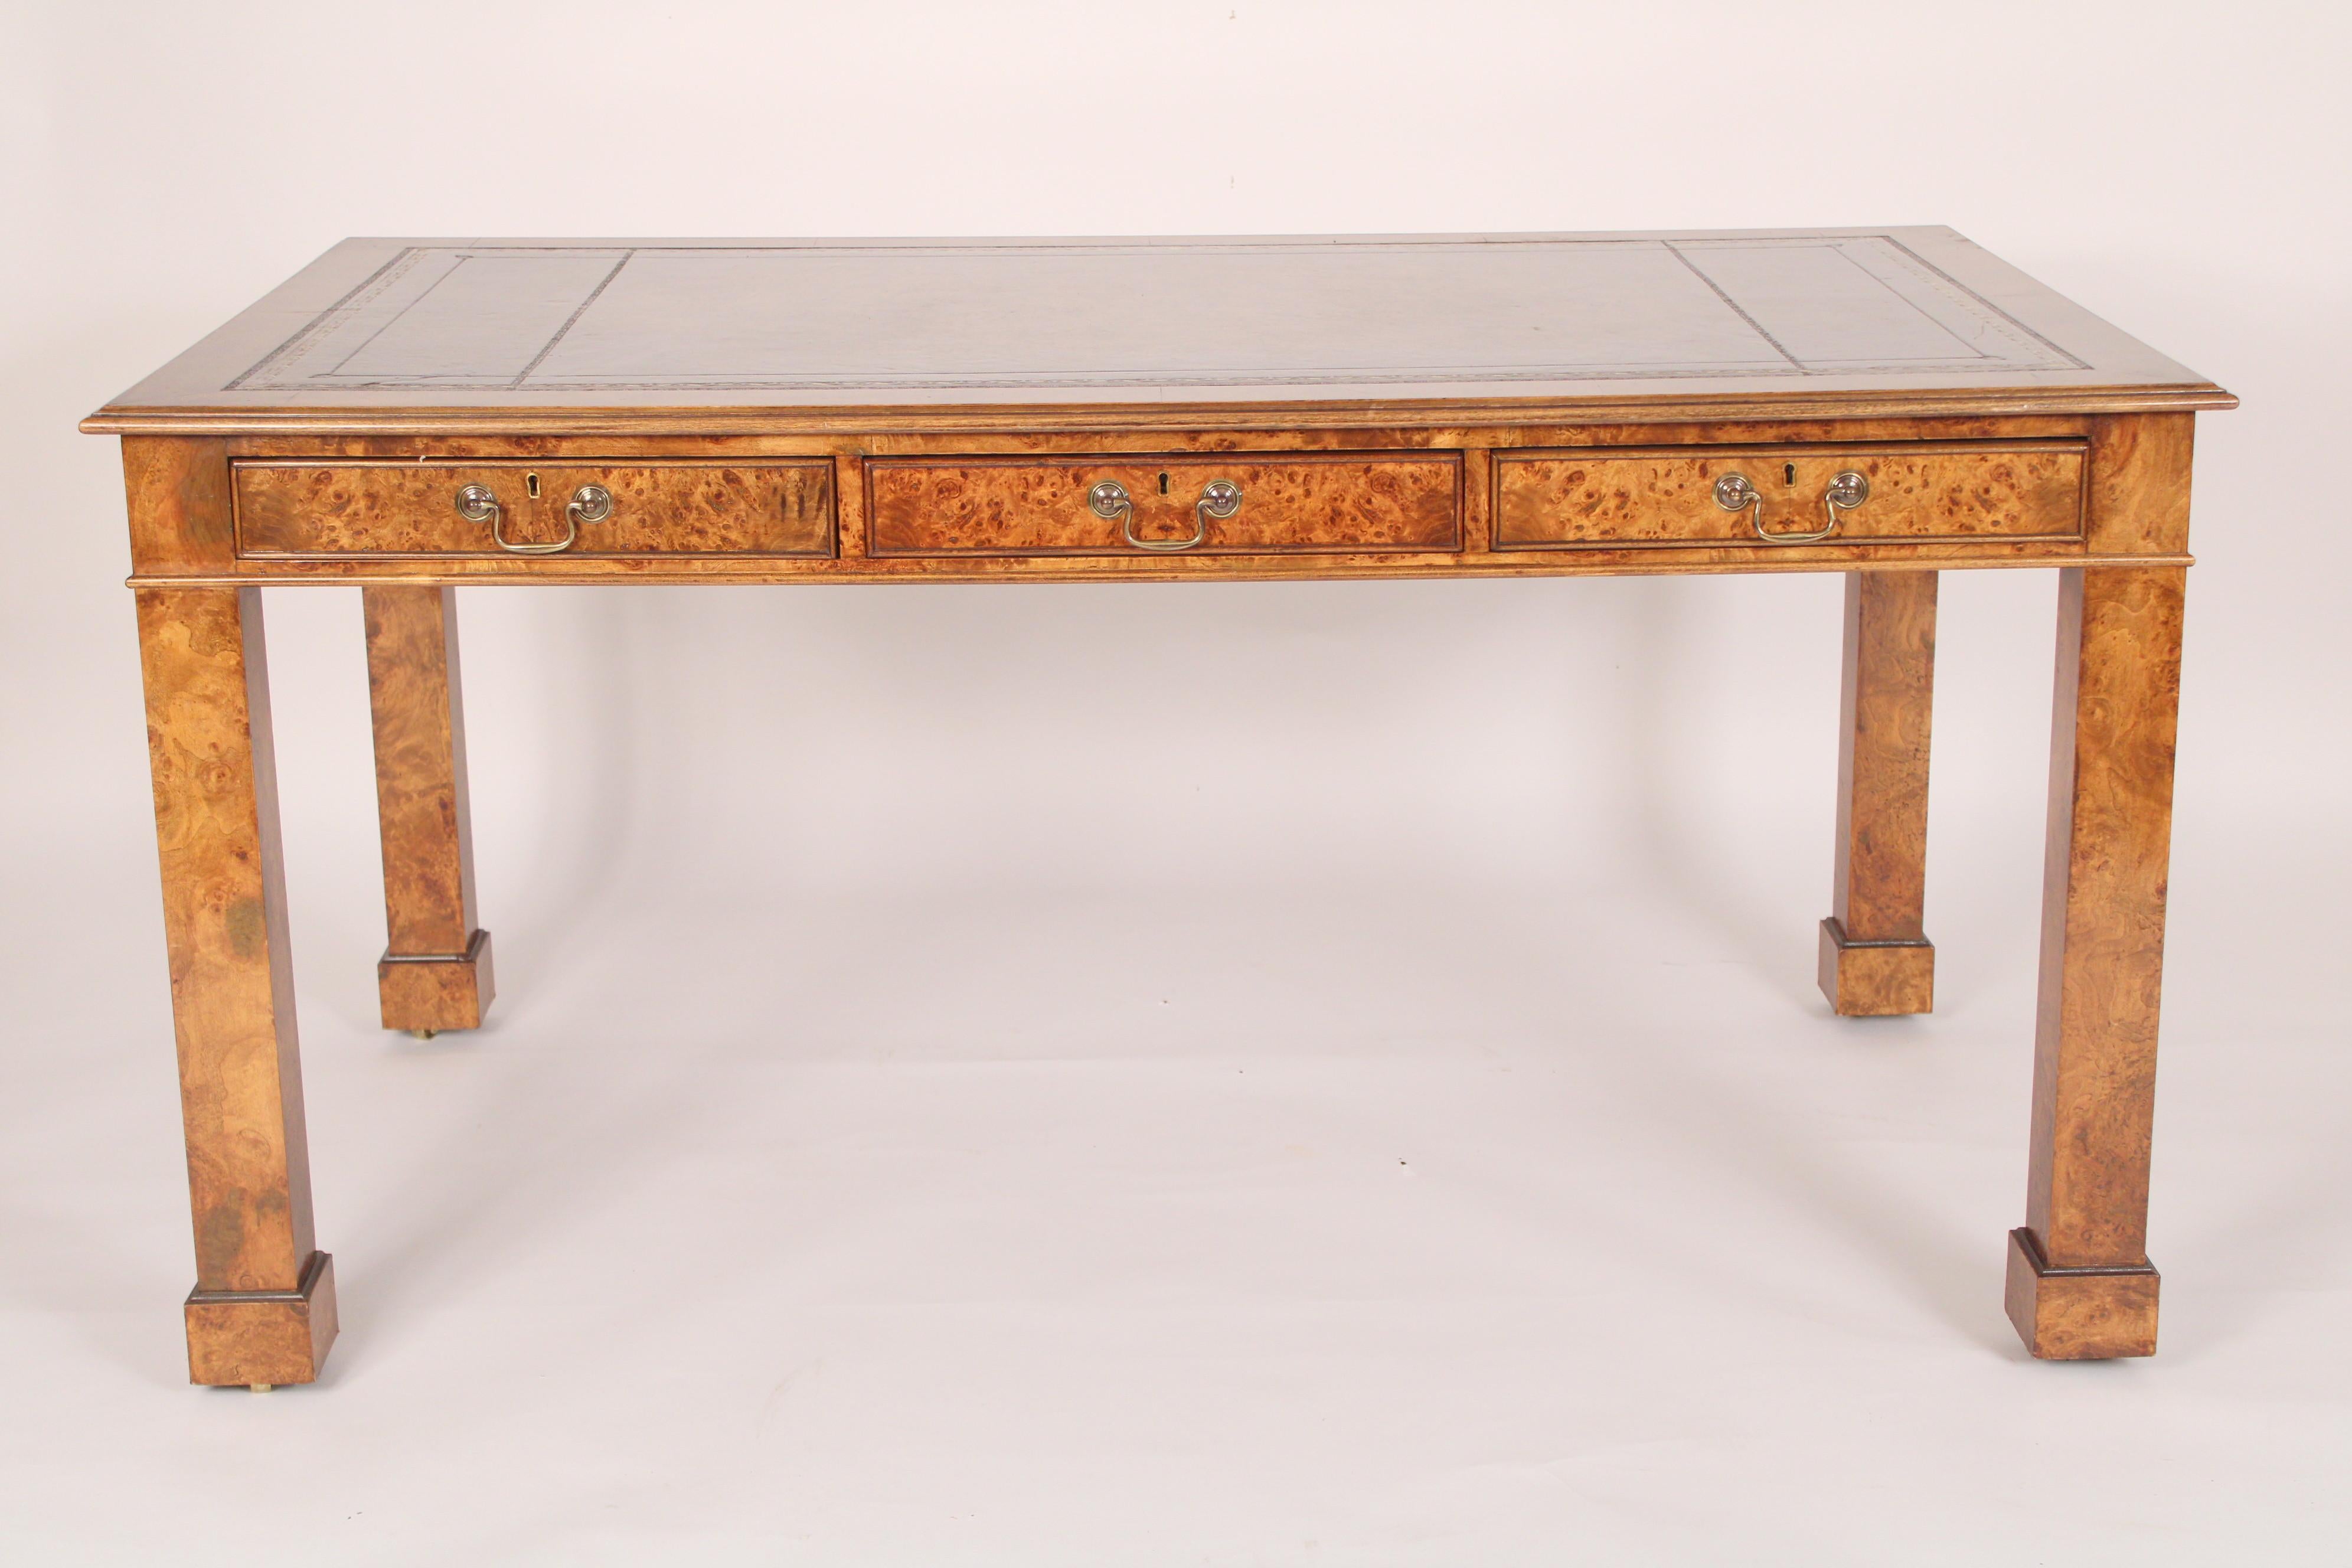 George III style burl elm partners writing table, late 20th century. With a gilt embossed tooled leather top, 3 frieze drawers with brass hardware on each side of desk, resting on square marlborough legs with block feet. Knee clearance 24.75